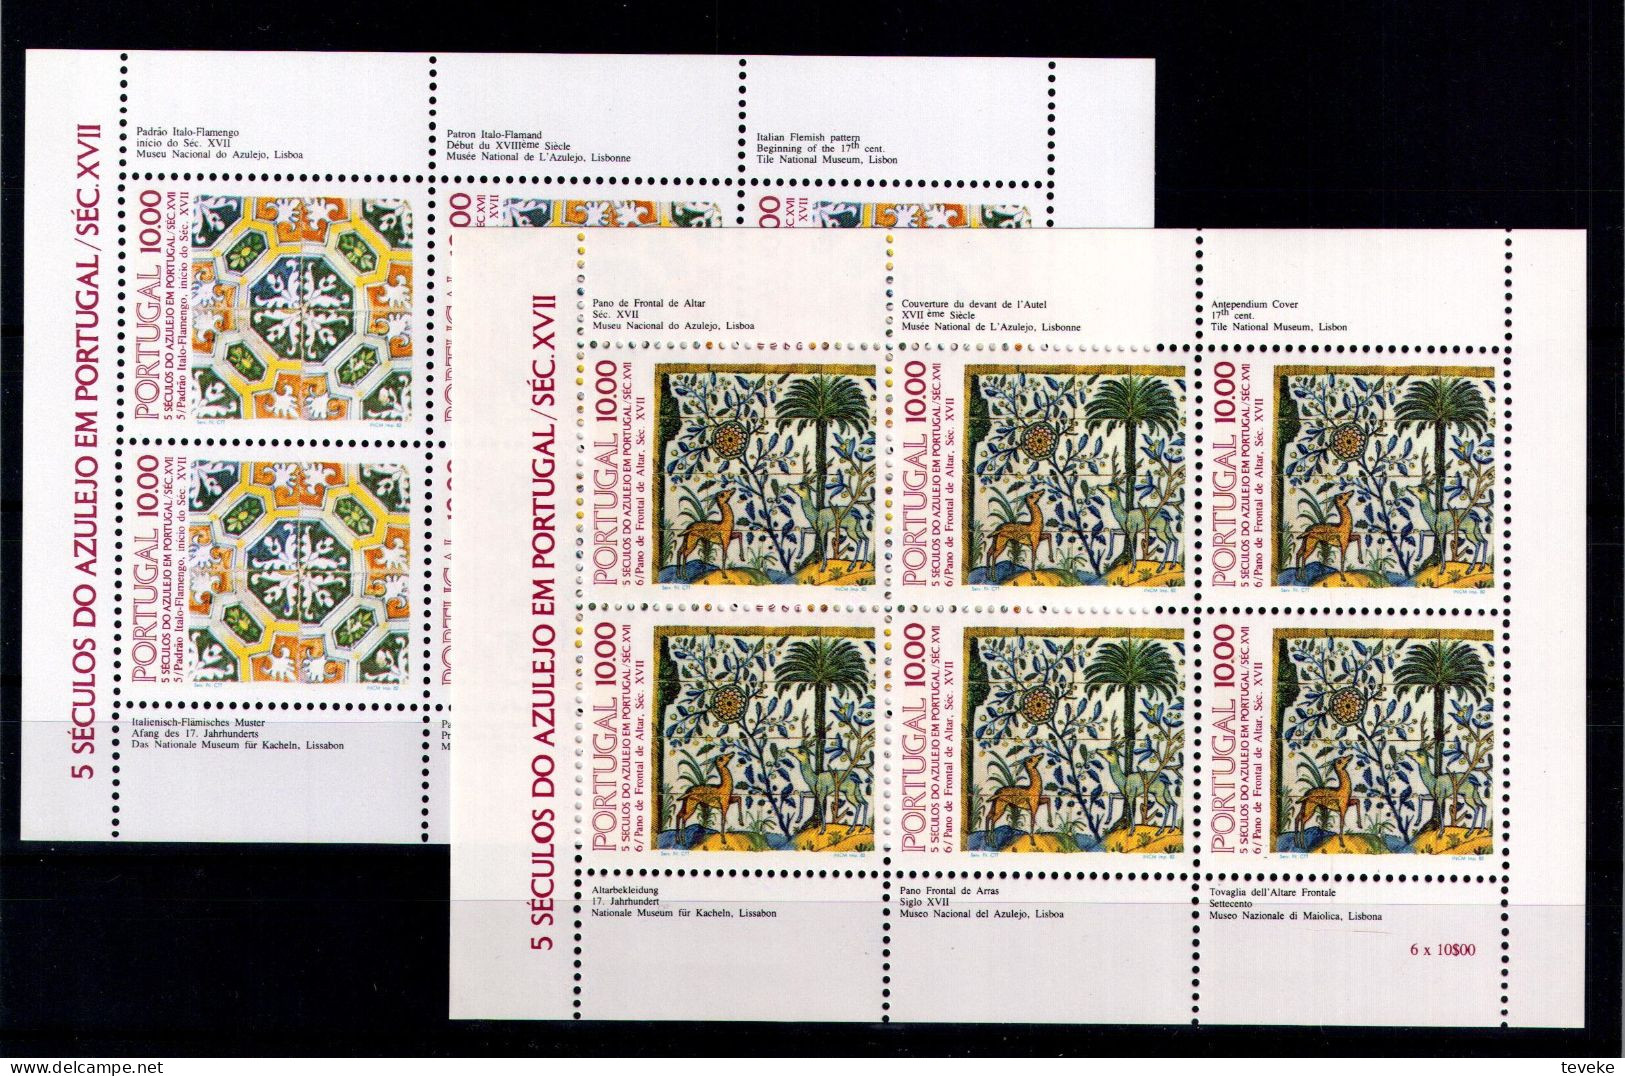 PORTUGAL 1981/1985 - MNH ** - Azulejos - Complete Set Of Blocks And Minisheets - Neufs